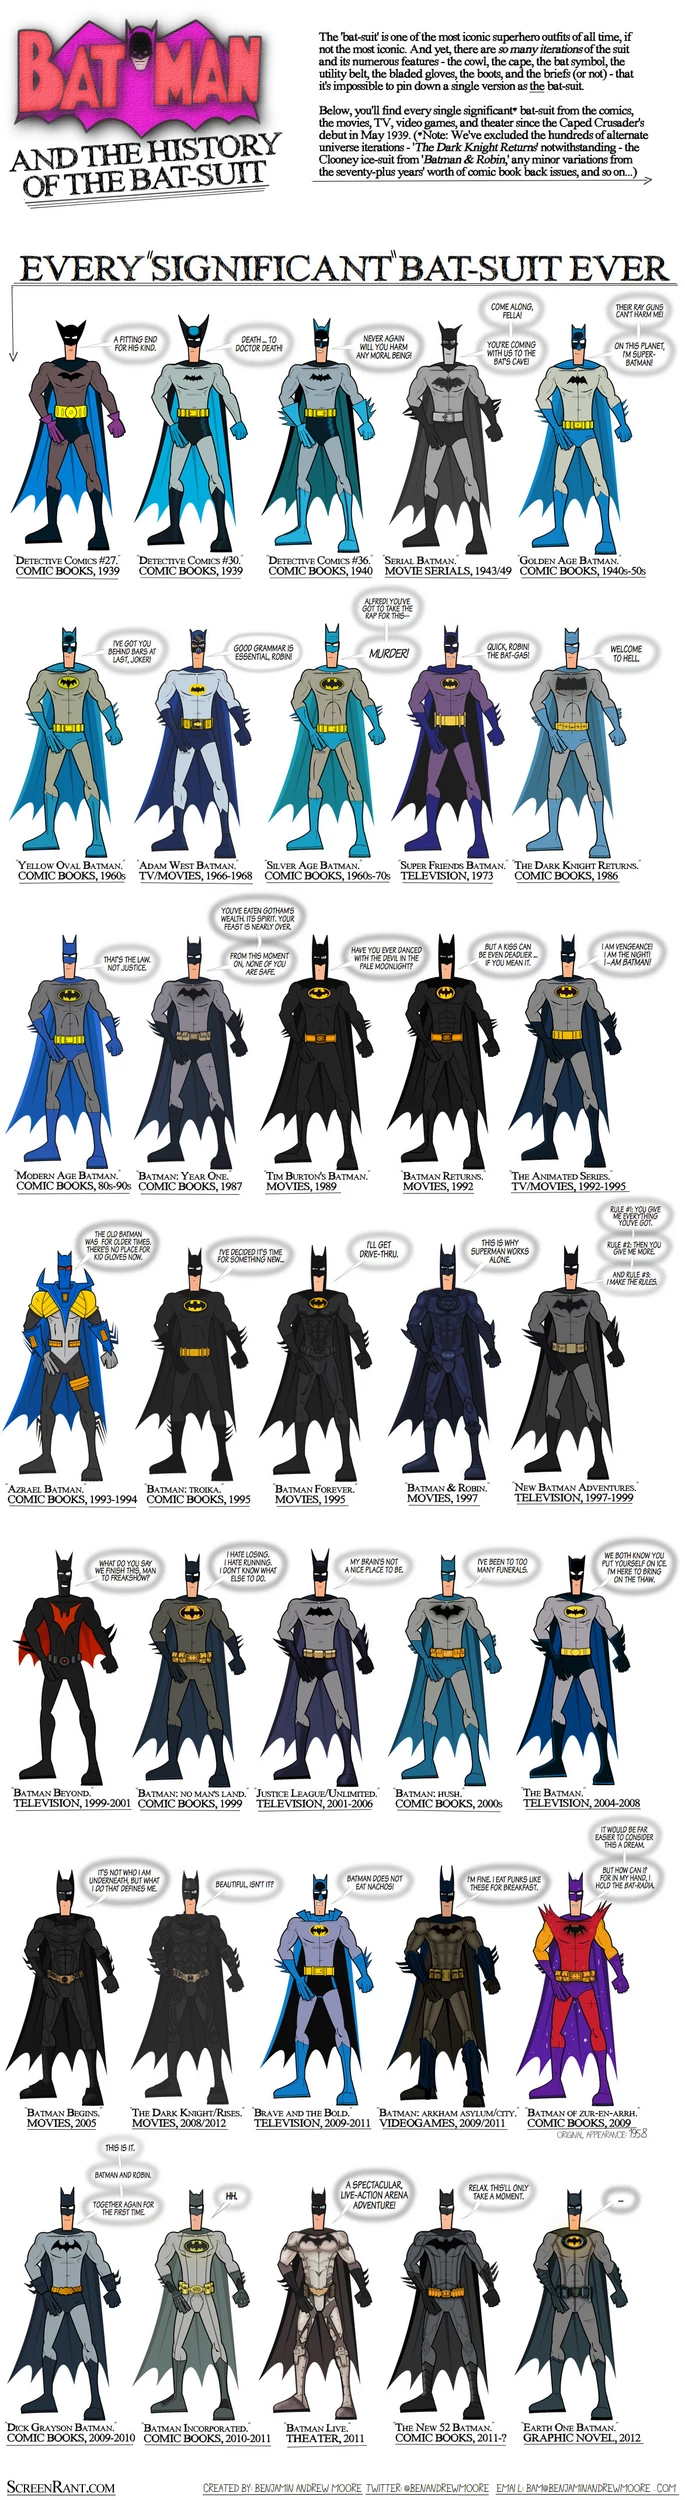 Every Major Batman Costume in One Convenient Infographic [Art]